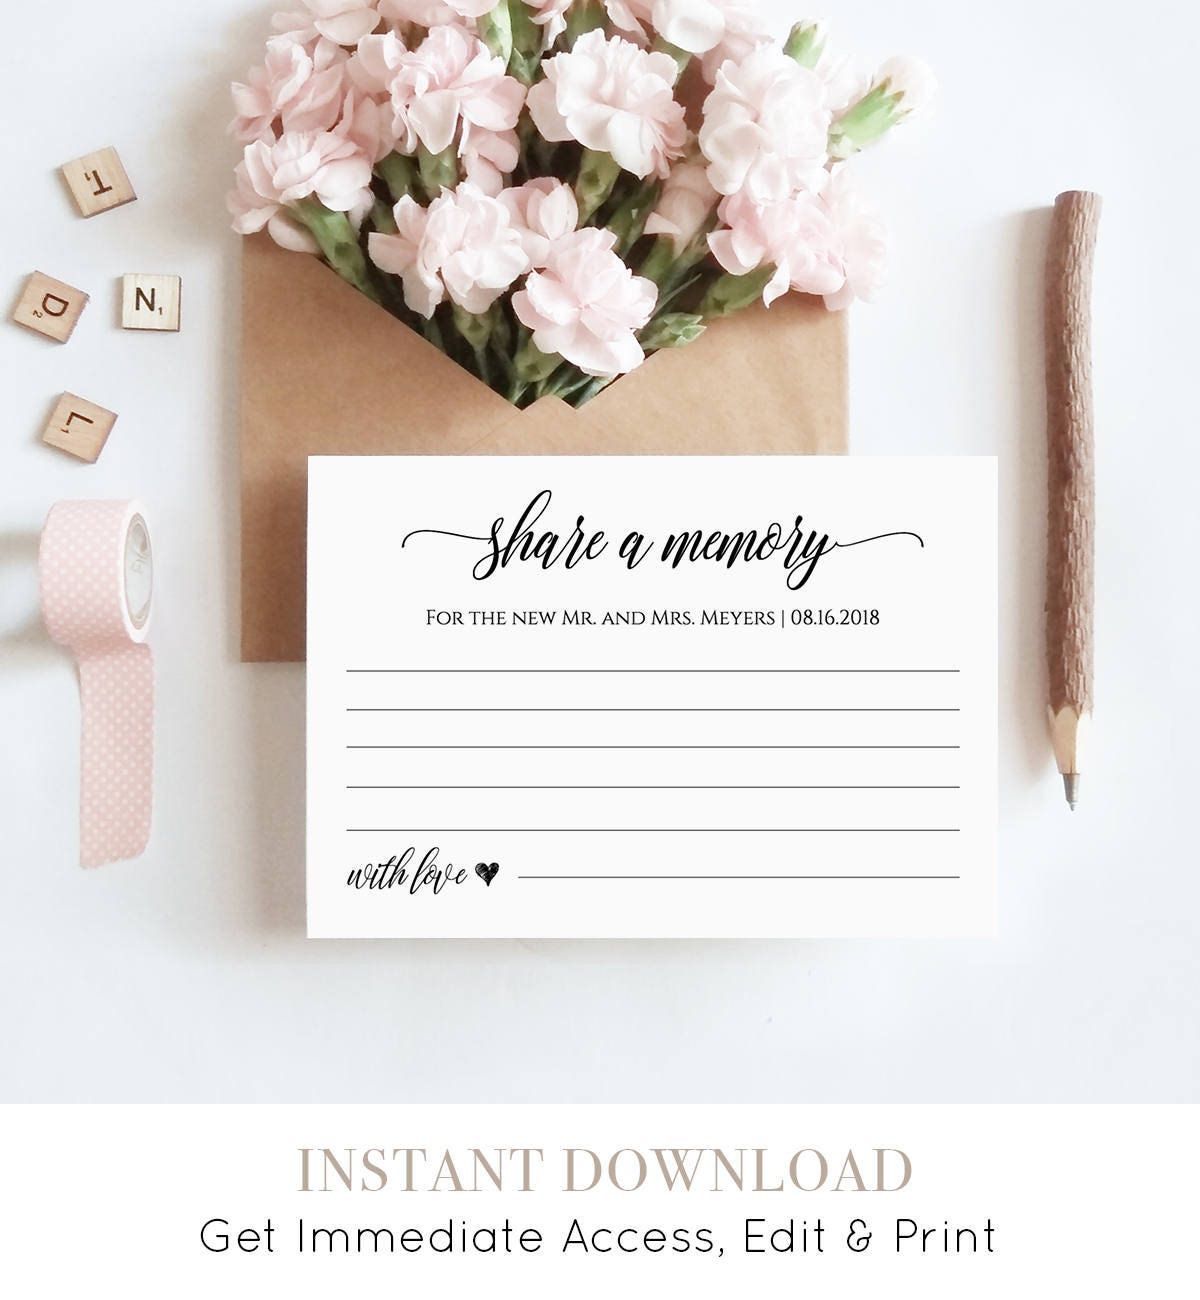 Share a Memory Printable Card, Wedding Advice Template for Throughout In Memory Cards Templates